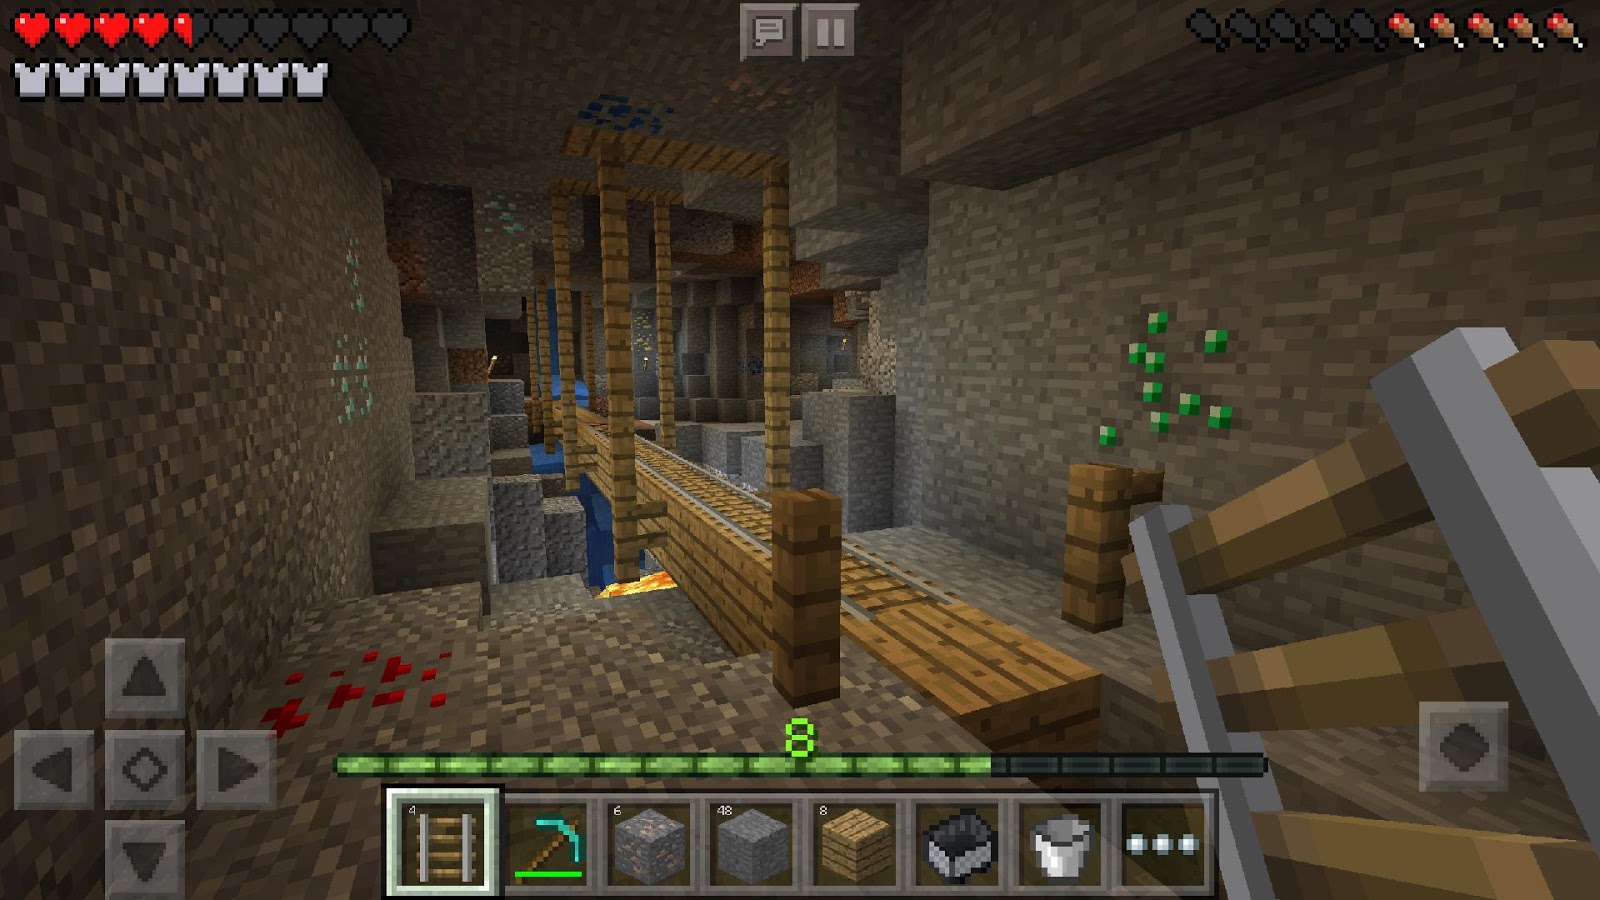 Download Minecraft mod apk for android 4.1 - ANDROID GAME MOD